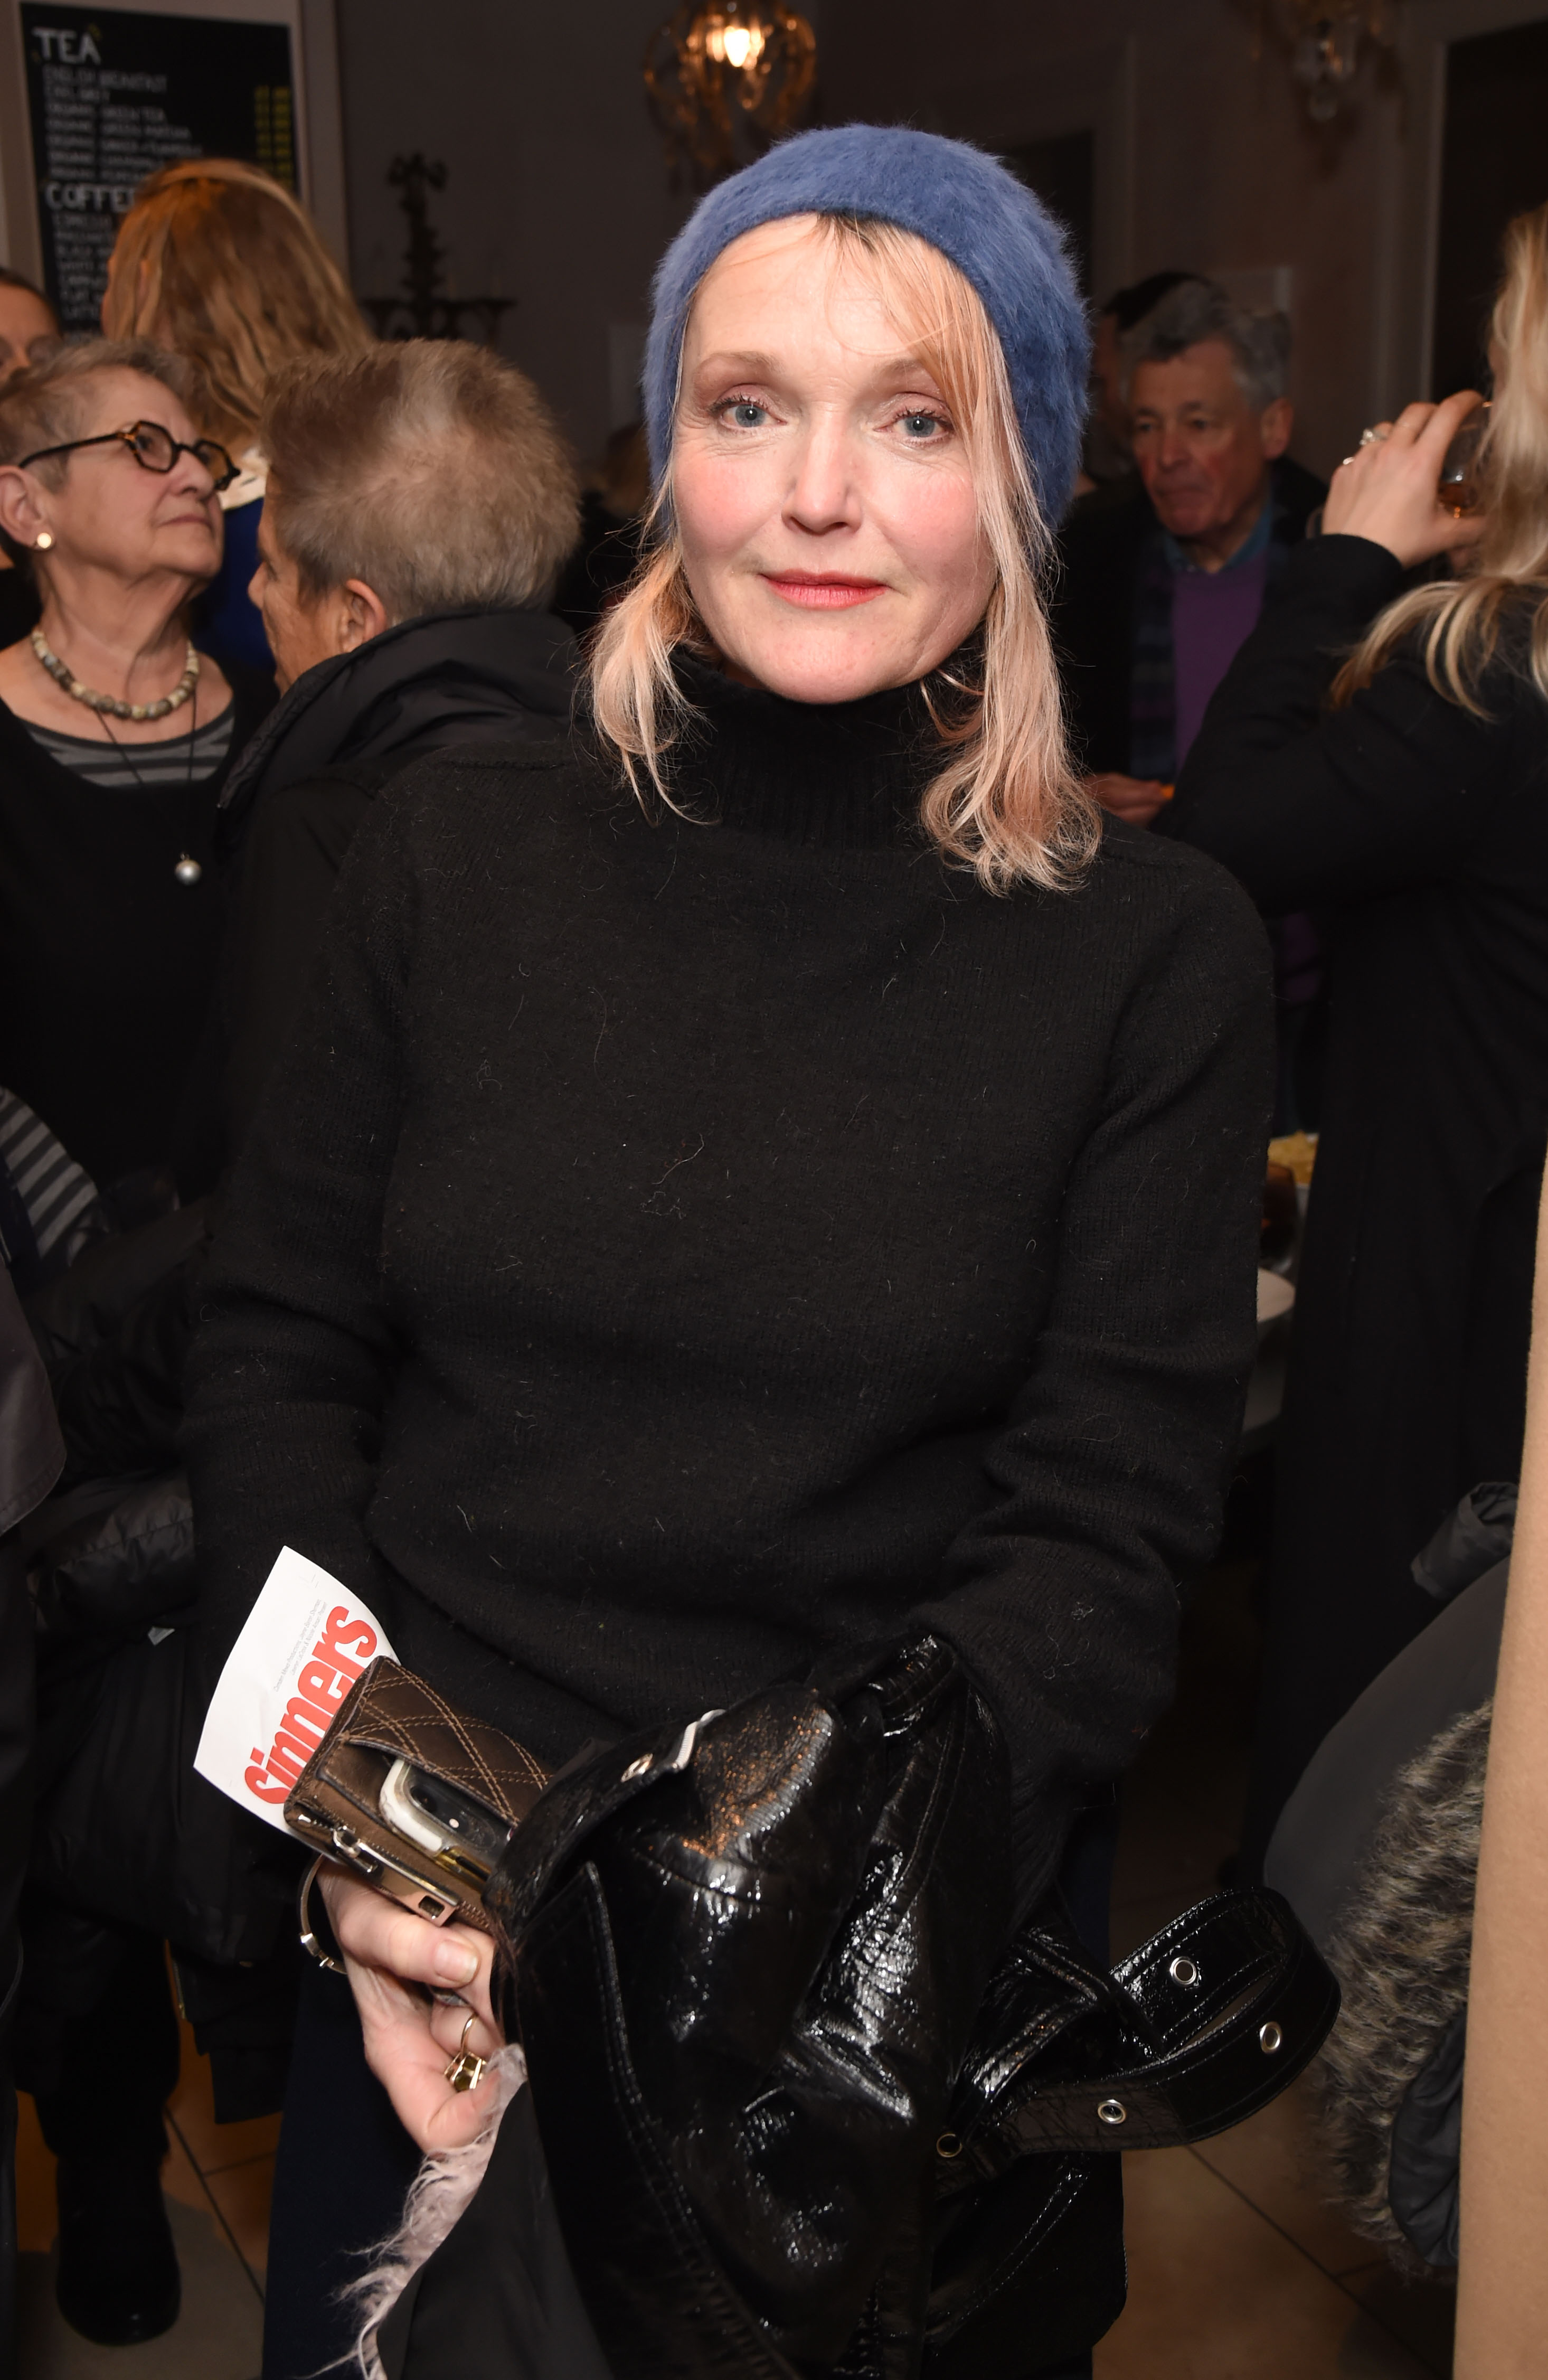 Miranda Richardson attends the press night after party for "Sinners" on February 26, 2020, in London, England. | Source: Getty Images